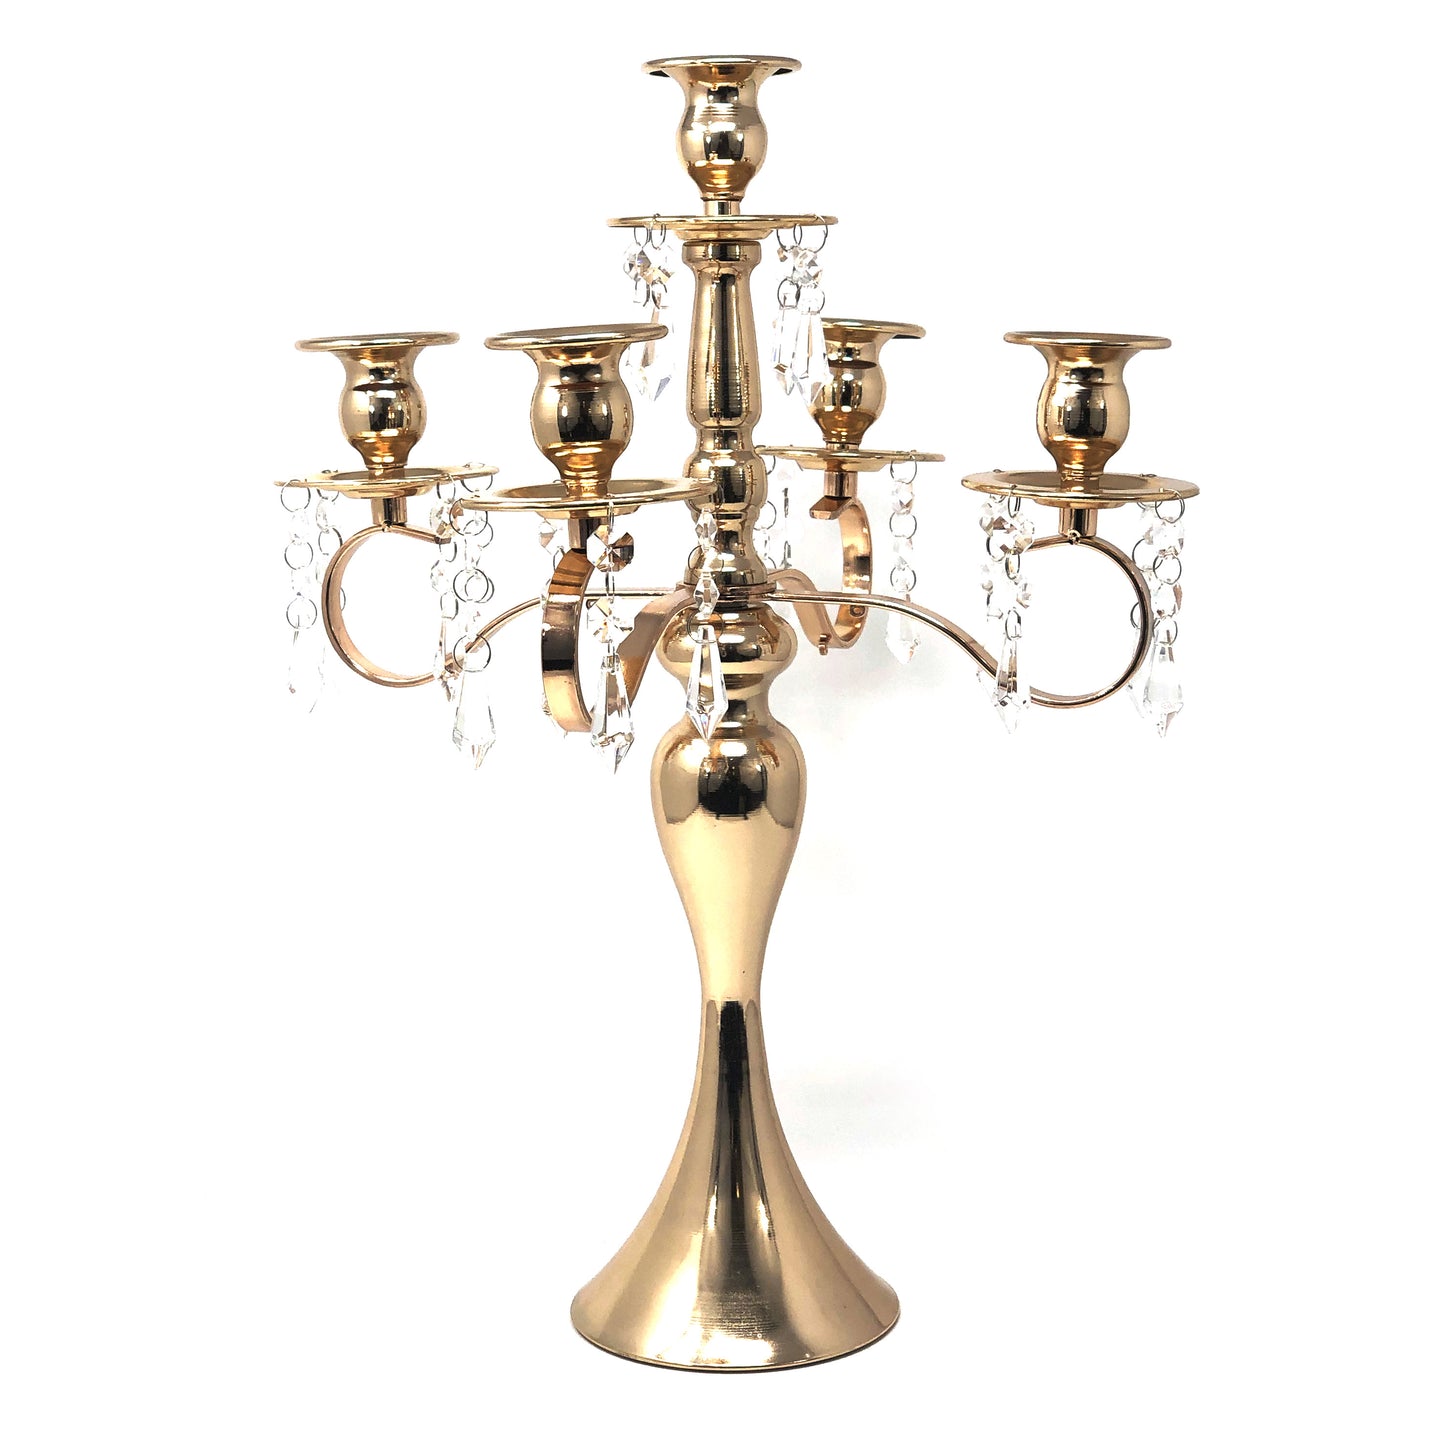 Allgala 18" 5-Arm Gold Plated Taper Candle Holder Candlestick Candelabra